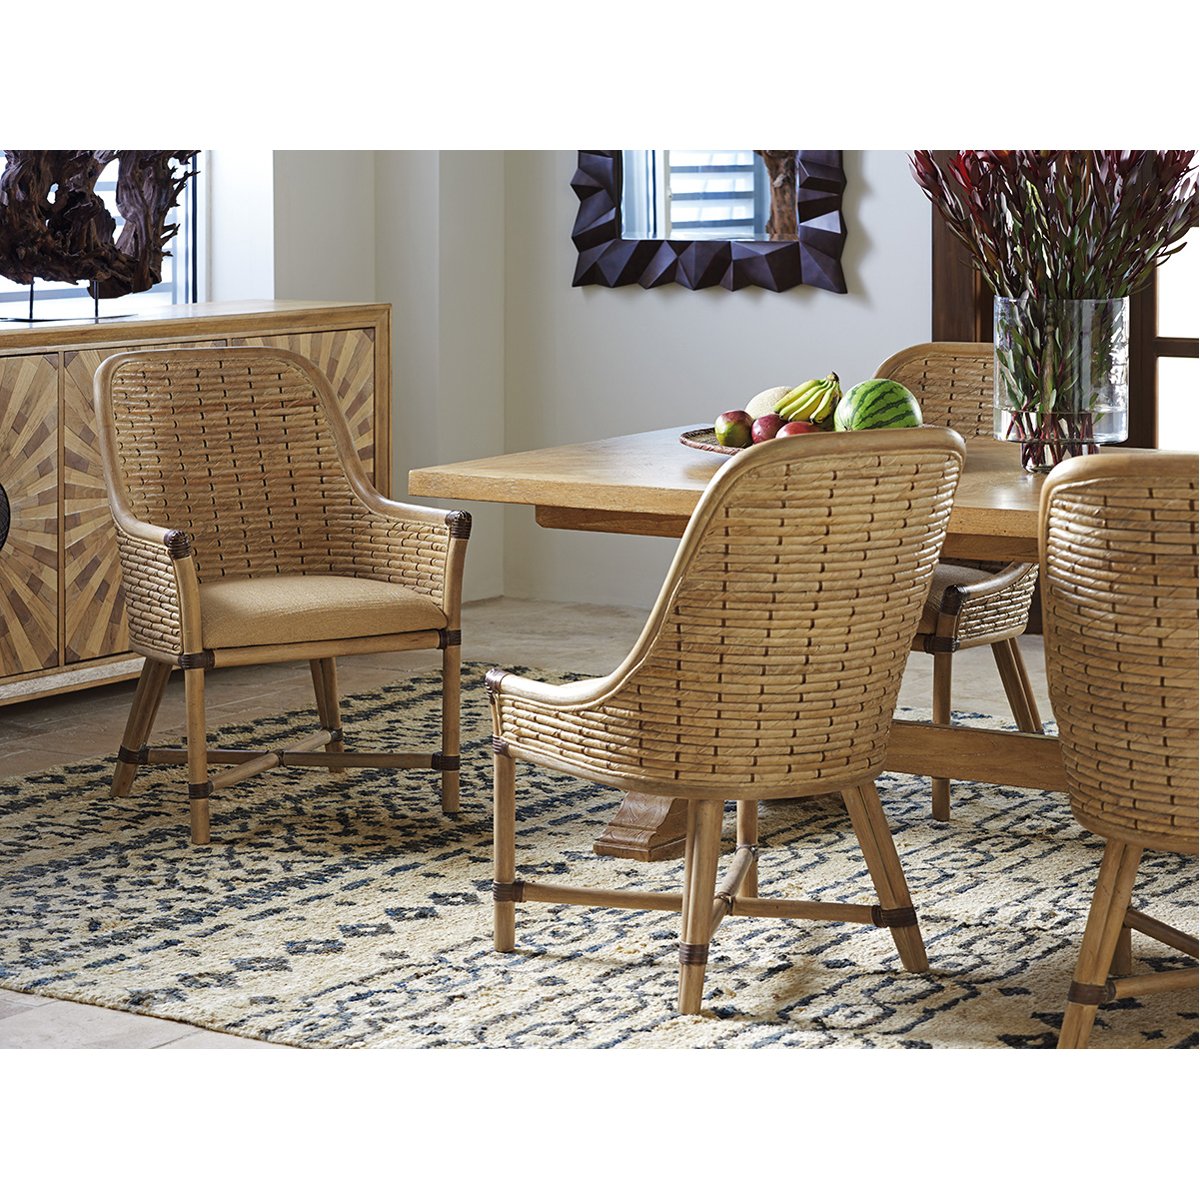 Tommy Bahama Keeling Woven Side Chair